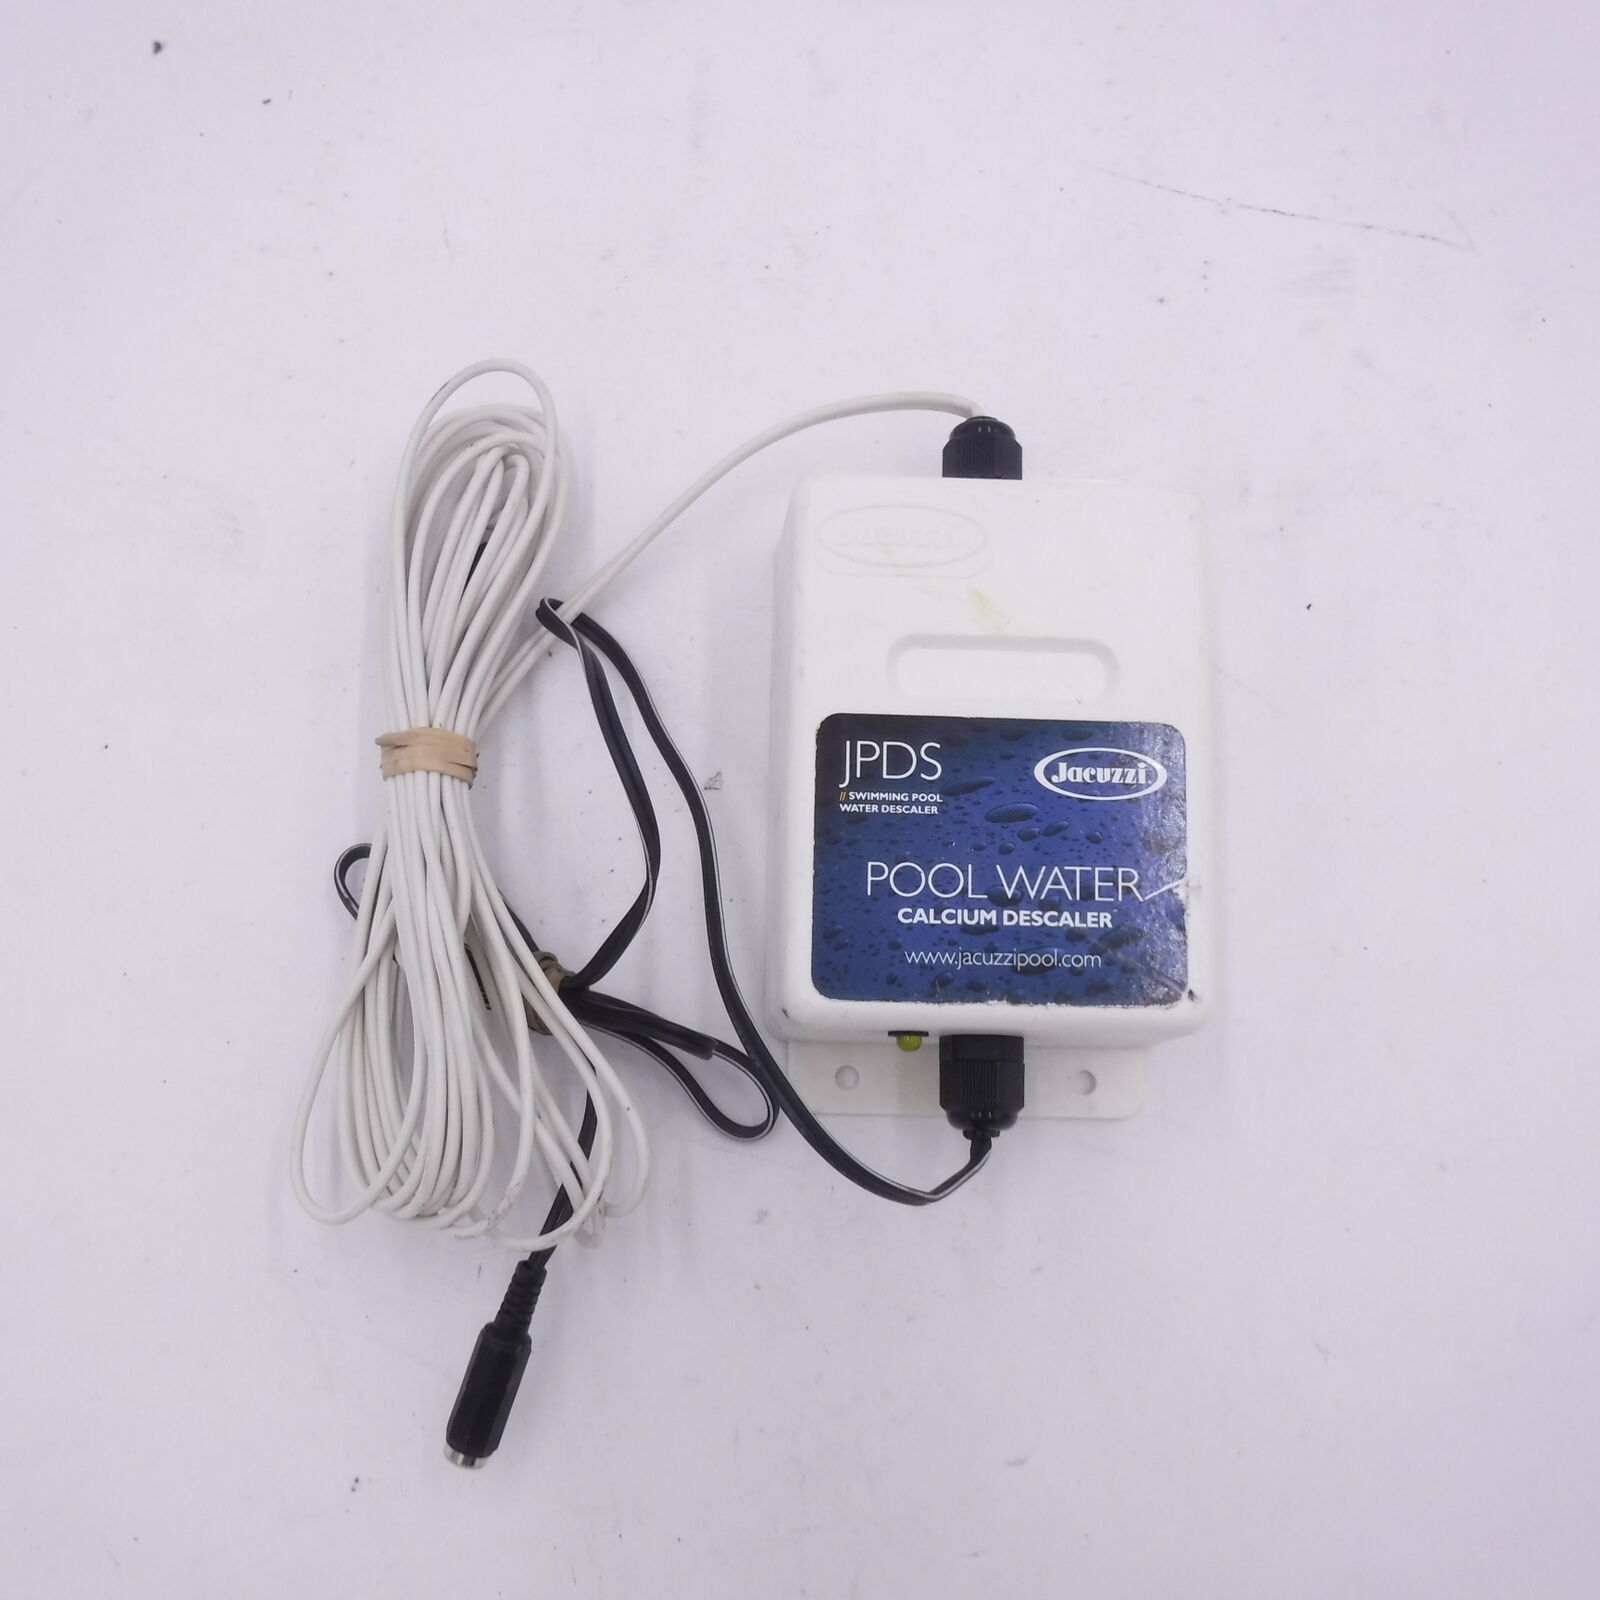 Jacuzzi Jpds Swimming Pool Water Calcium Descaler Missing Power Supply